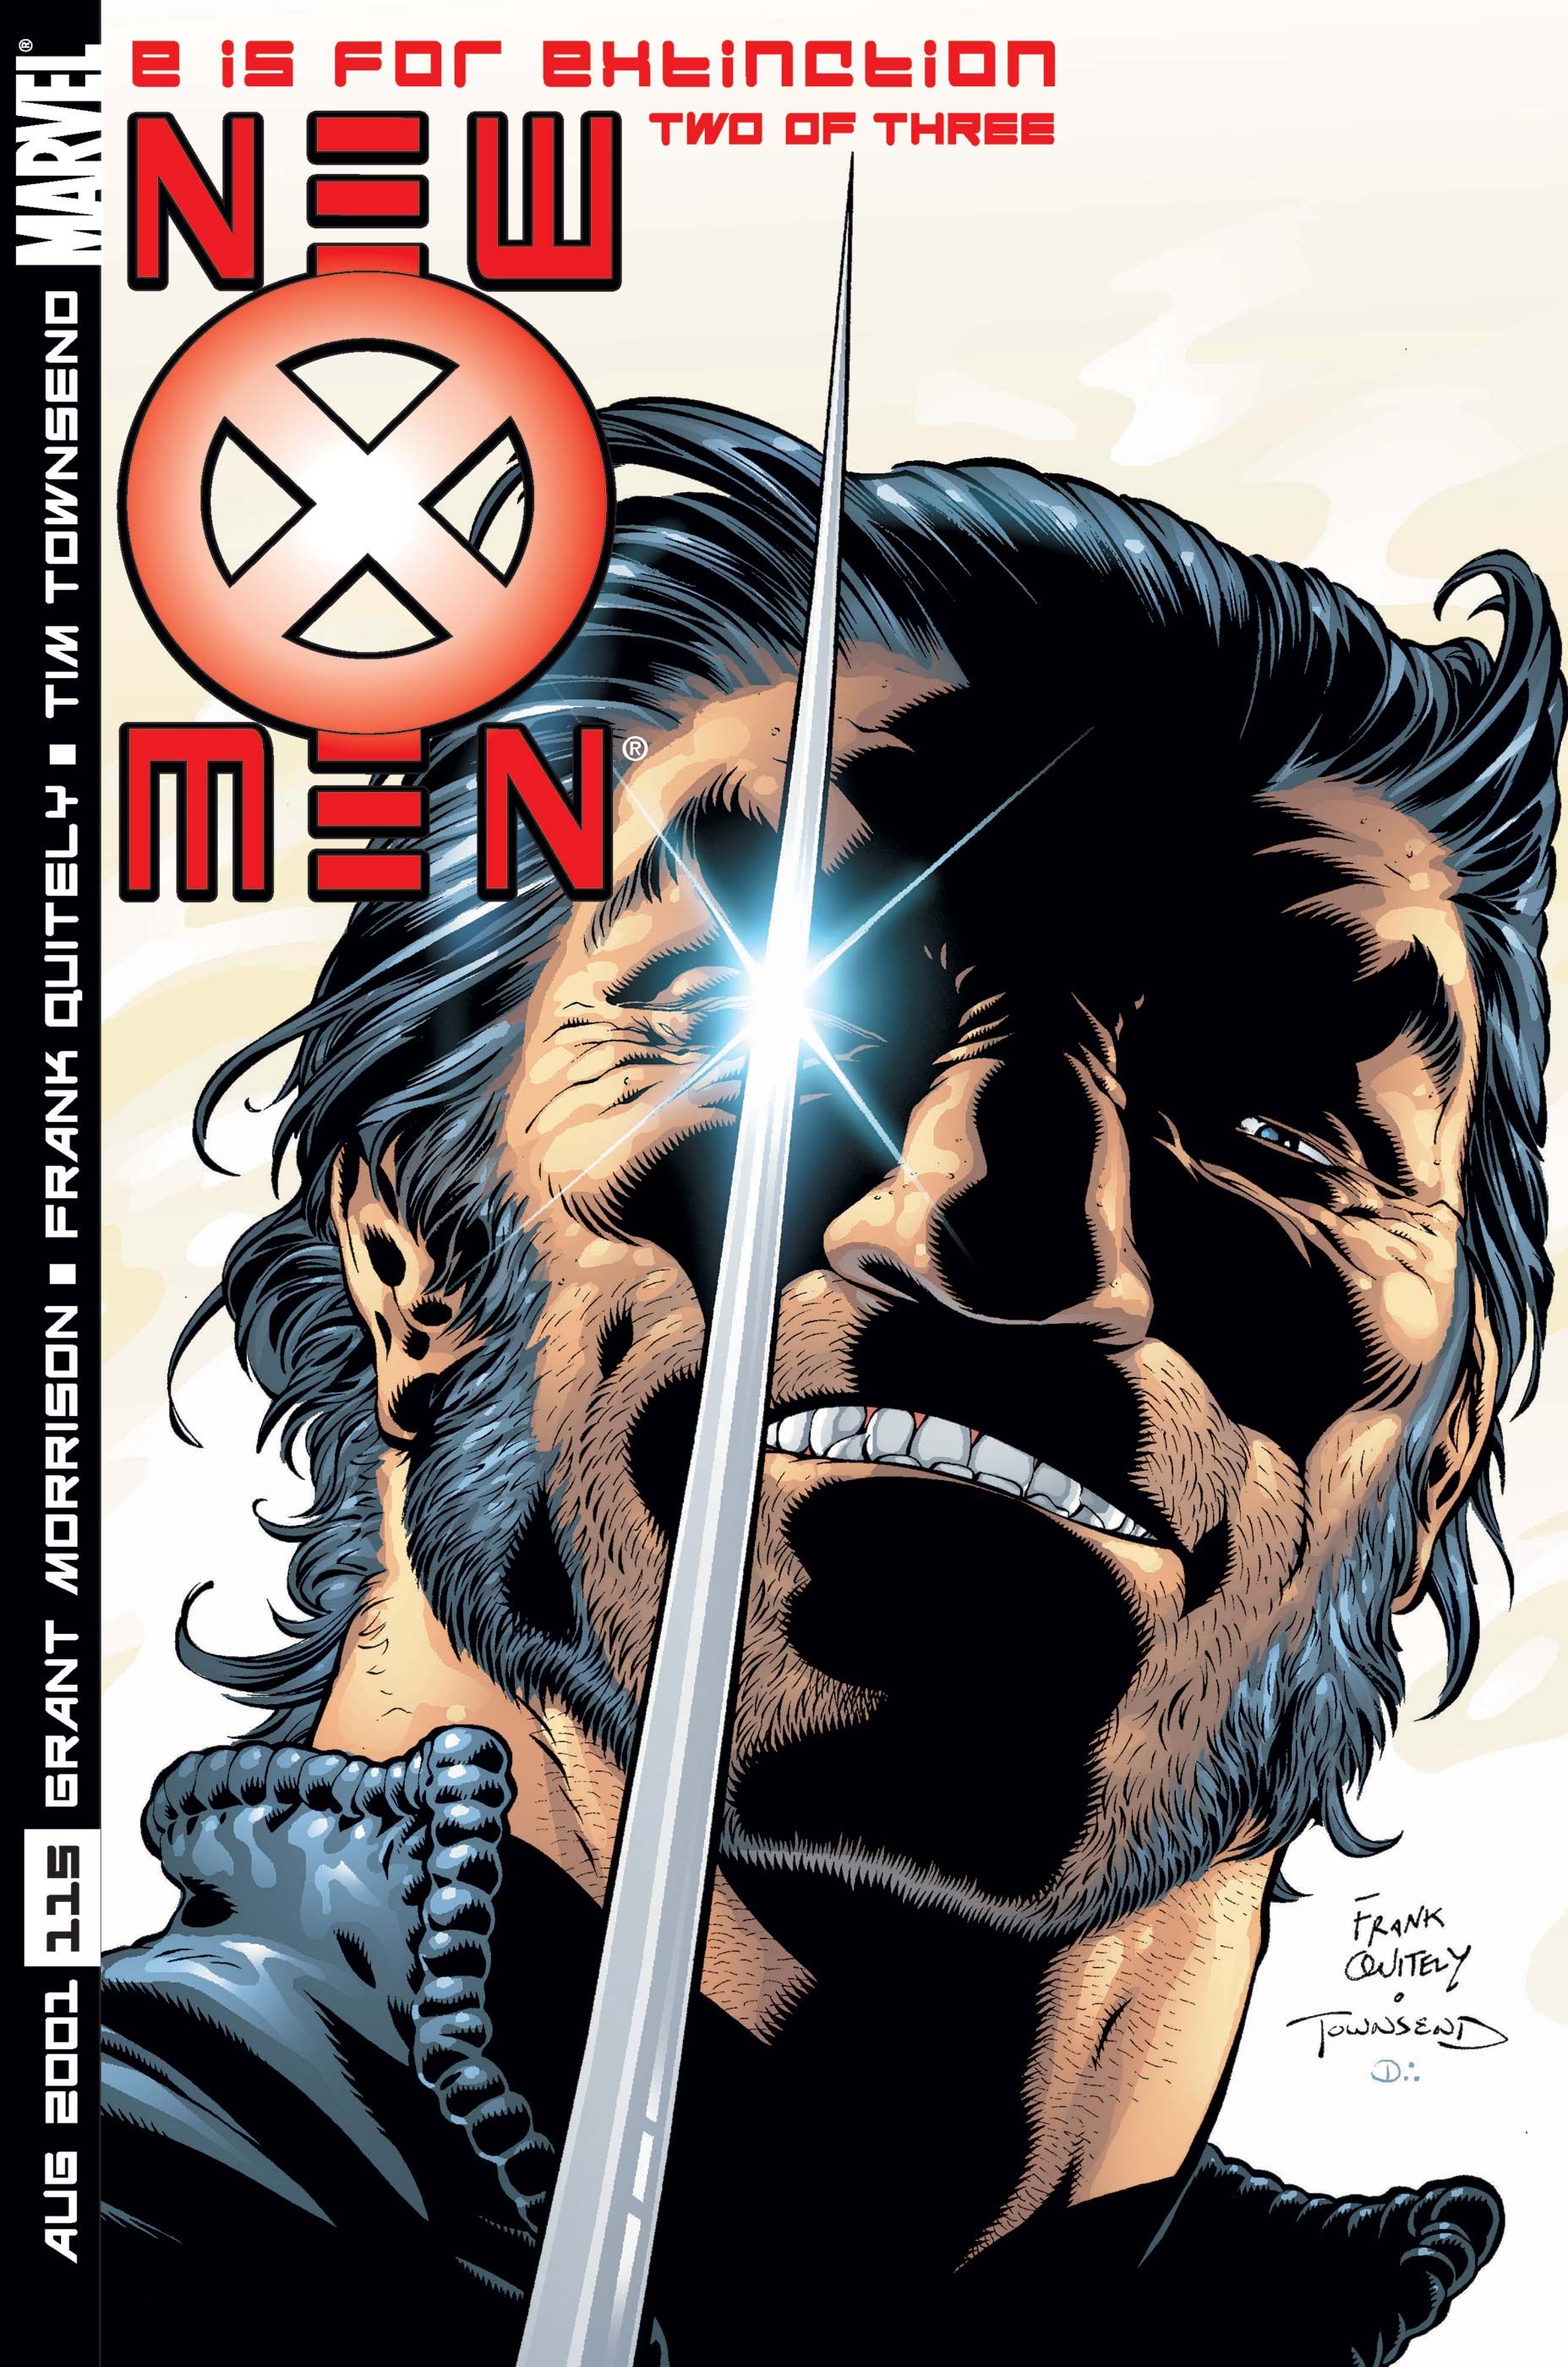 Wolverine on Frank Quitely's cover to New X-Men #115